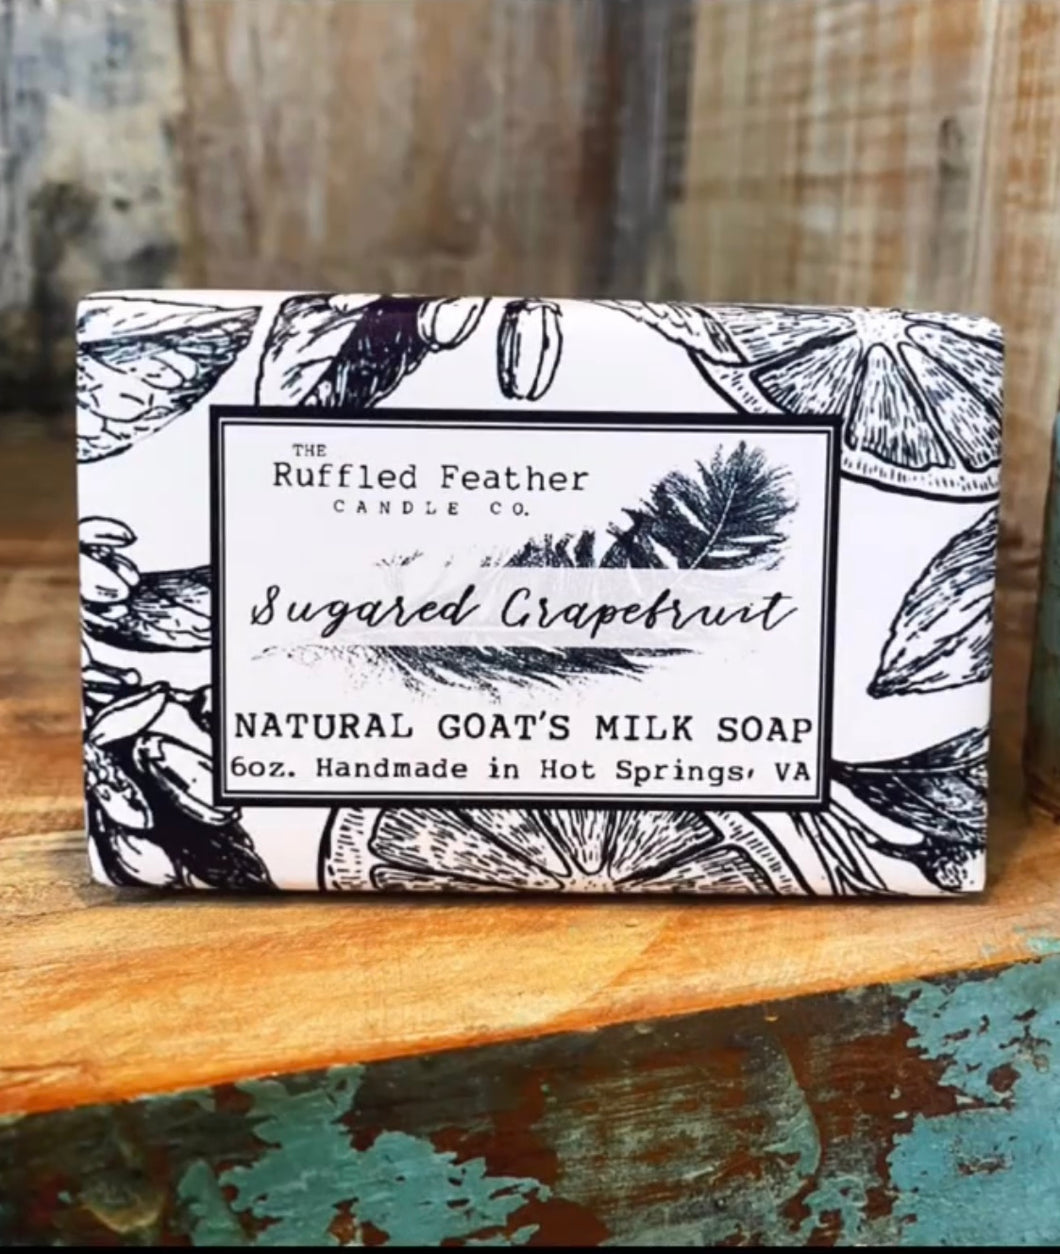 The Ruffled Feather Goat's Milk Soap - Sugared Grapefruit